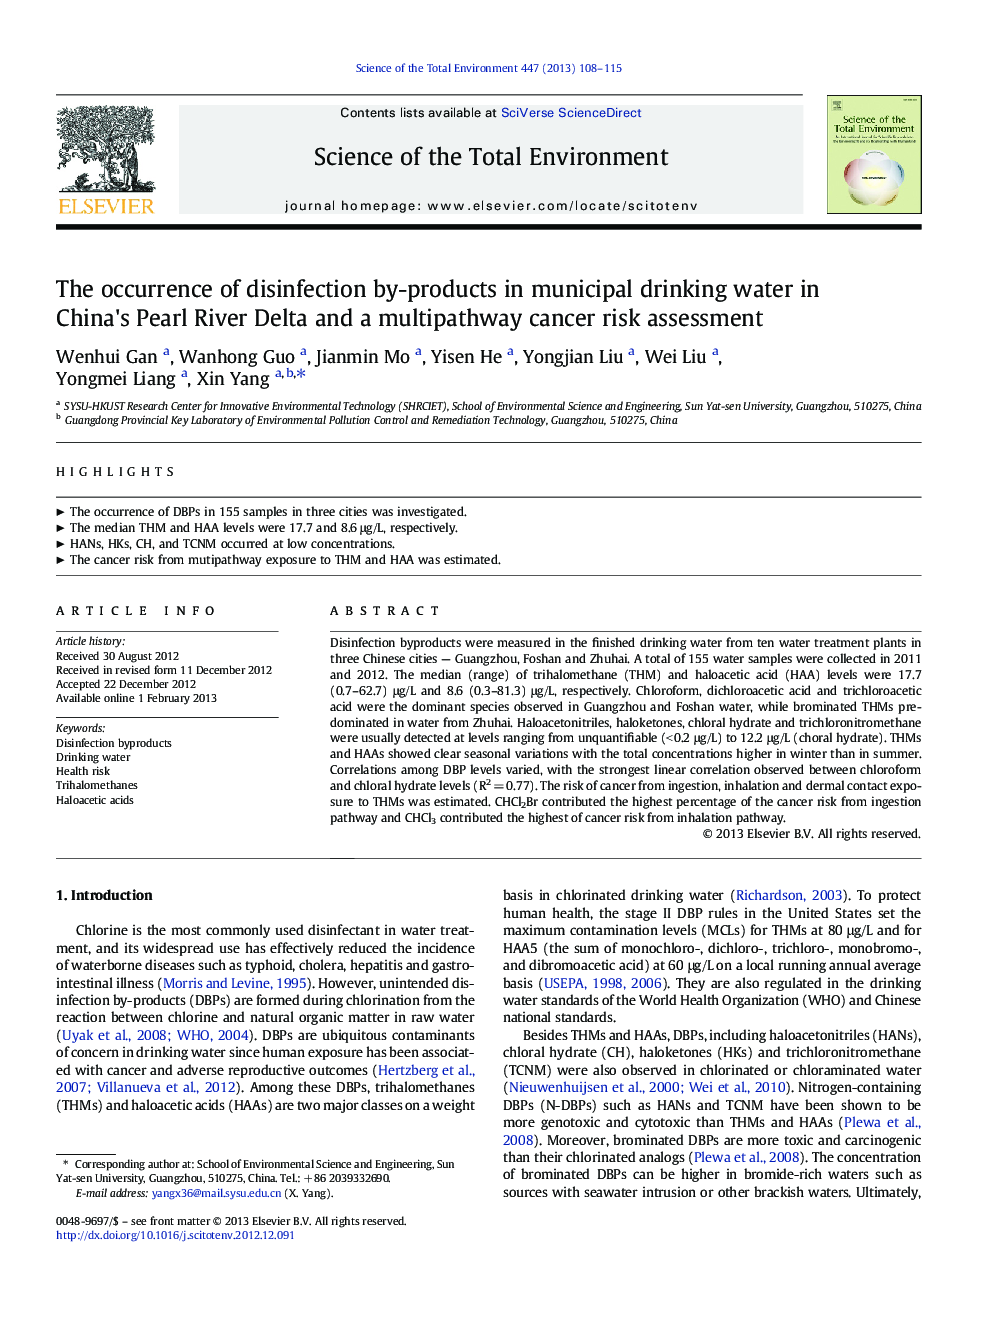 The occurrence of disinfection by-products in municipal drinking water in China's Pearl River Delta and a multipathway cancer risk assessment